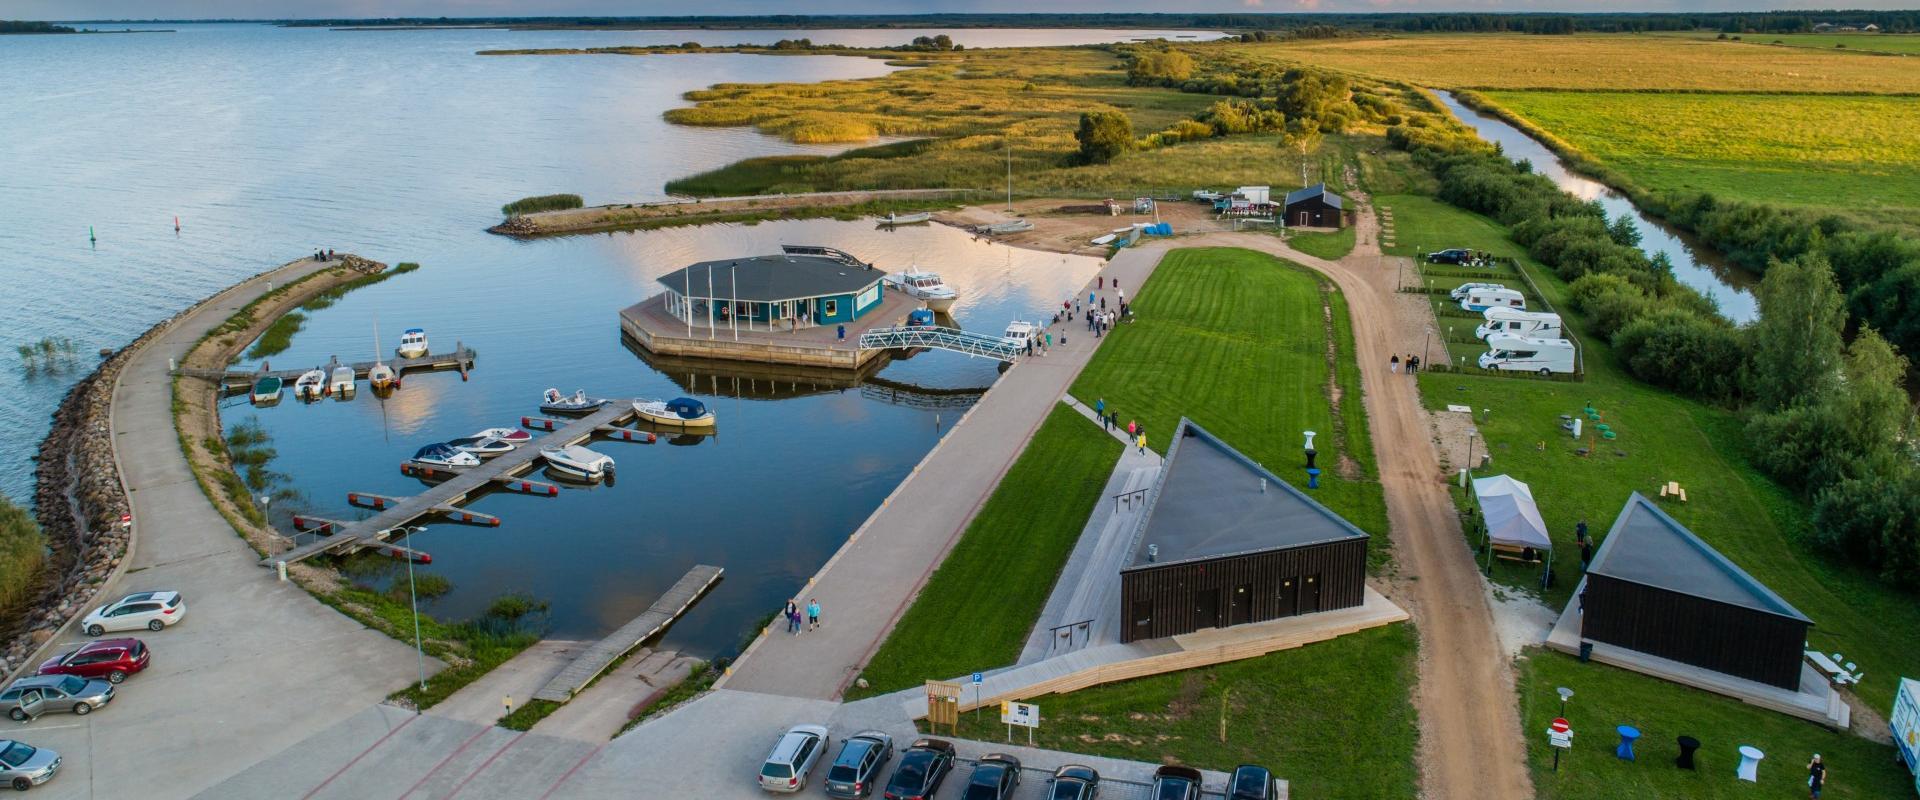 There is a new and modern full-service caravan park at Räpina Harbour, which can accommodate up to ten caravans. The park is covered in grass. All the